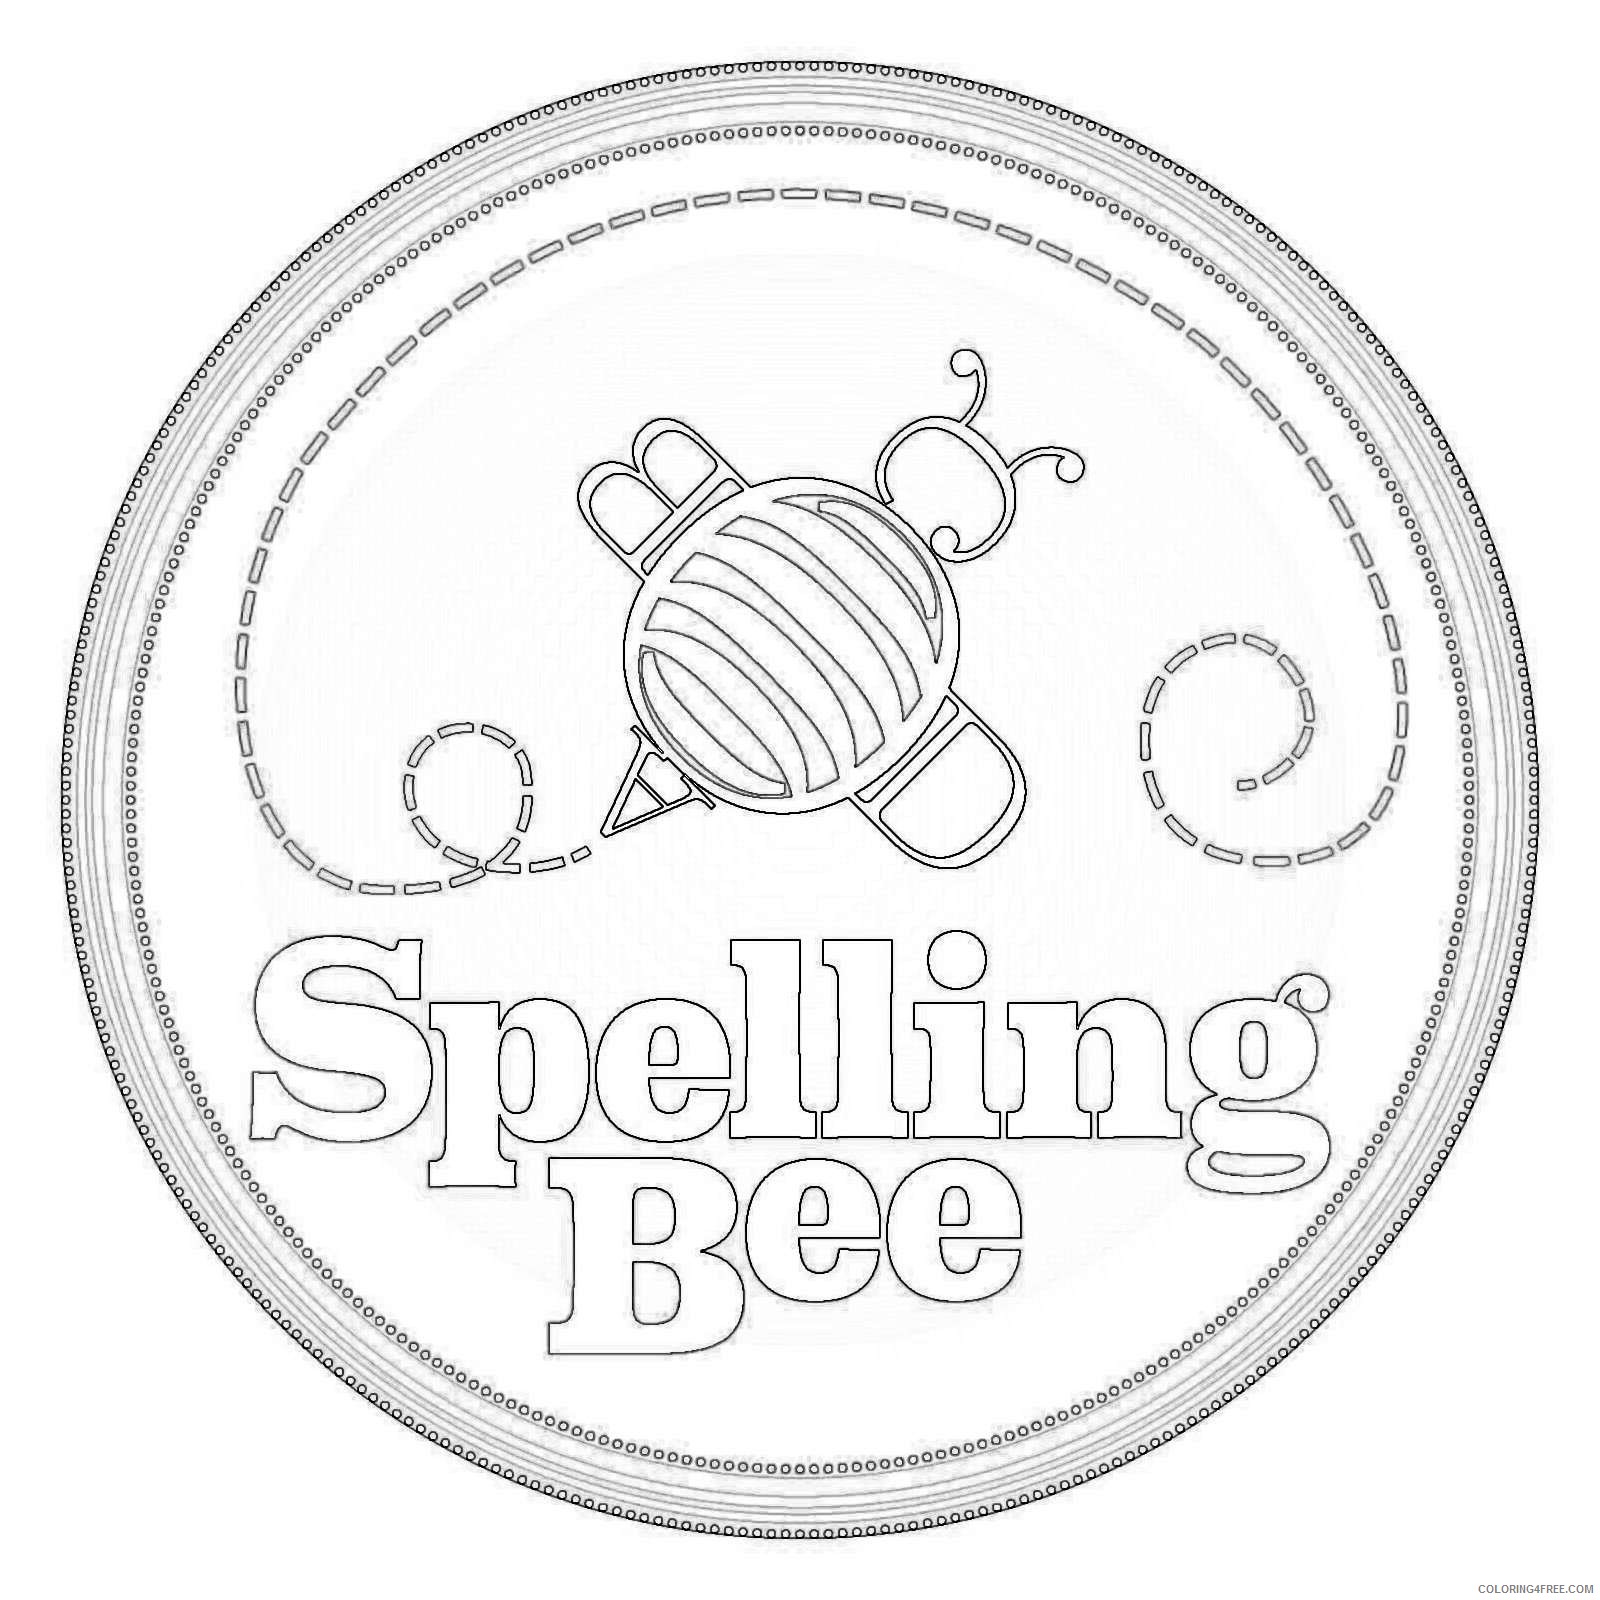 spelling bee sVe8sy coloring